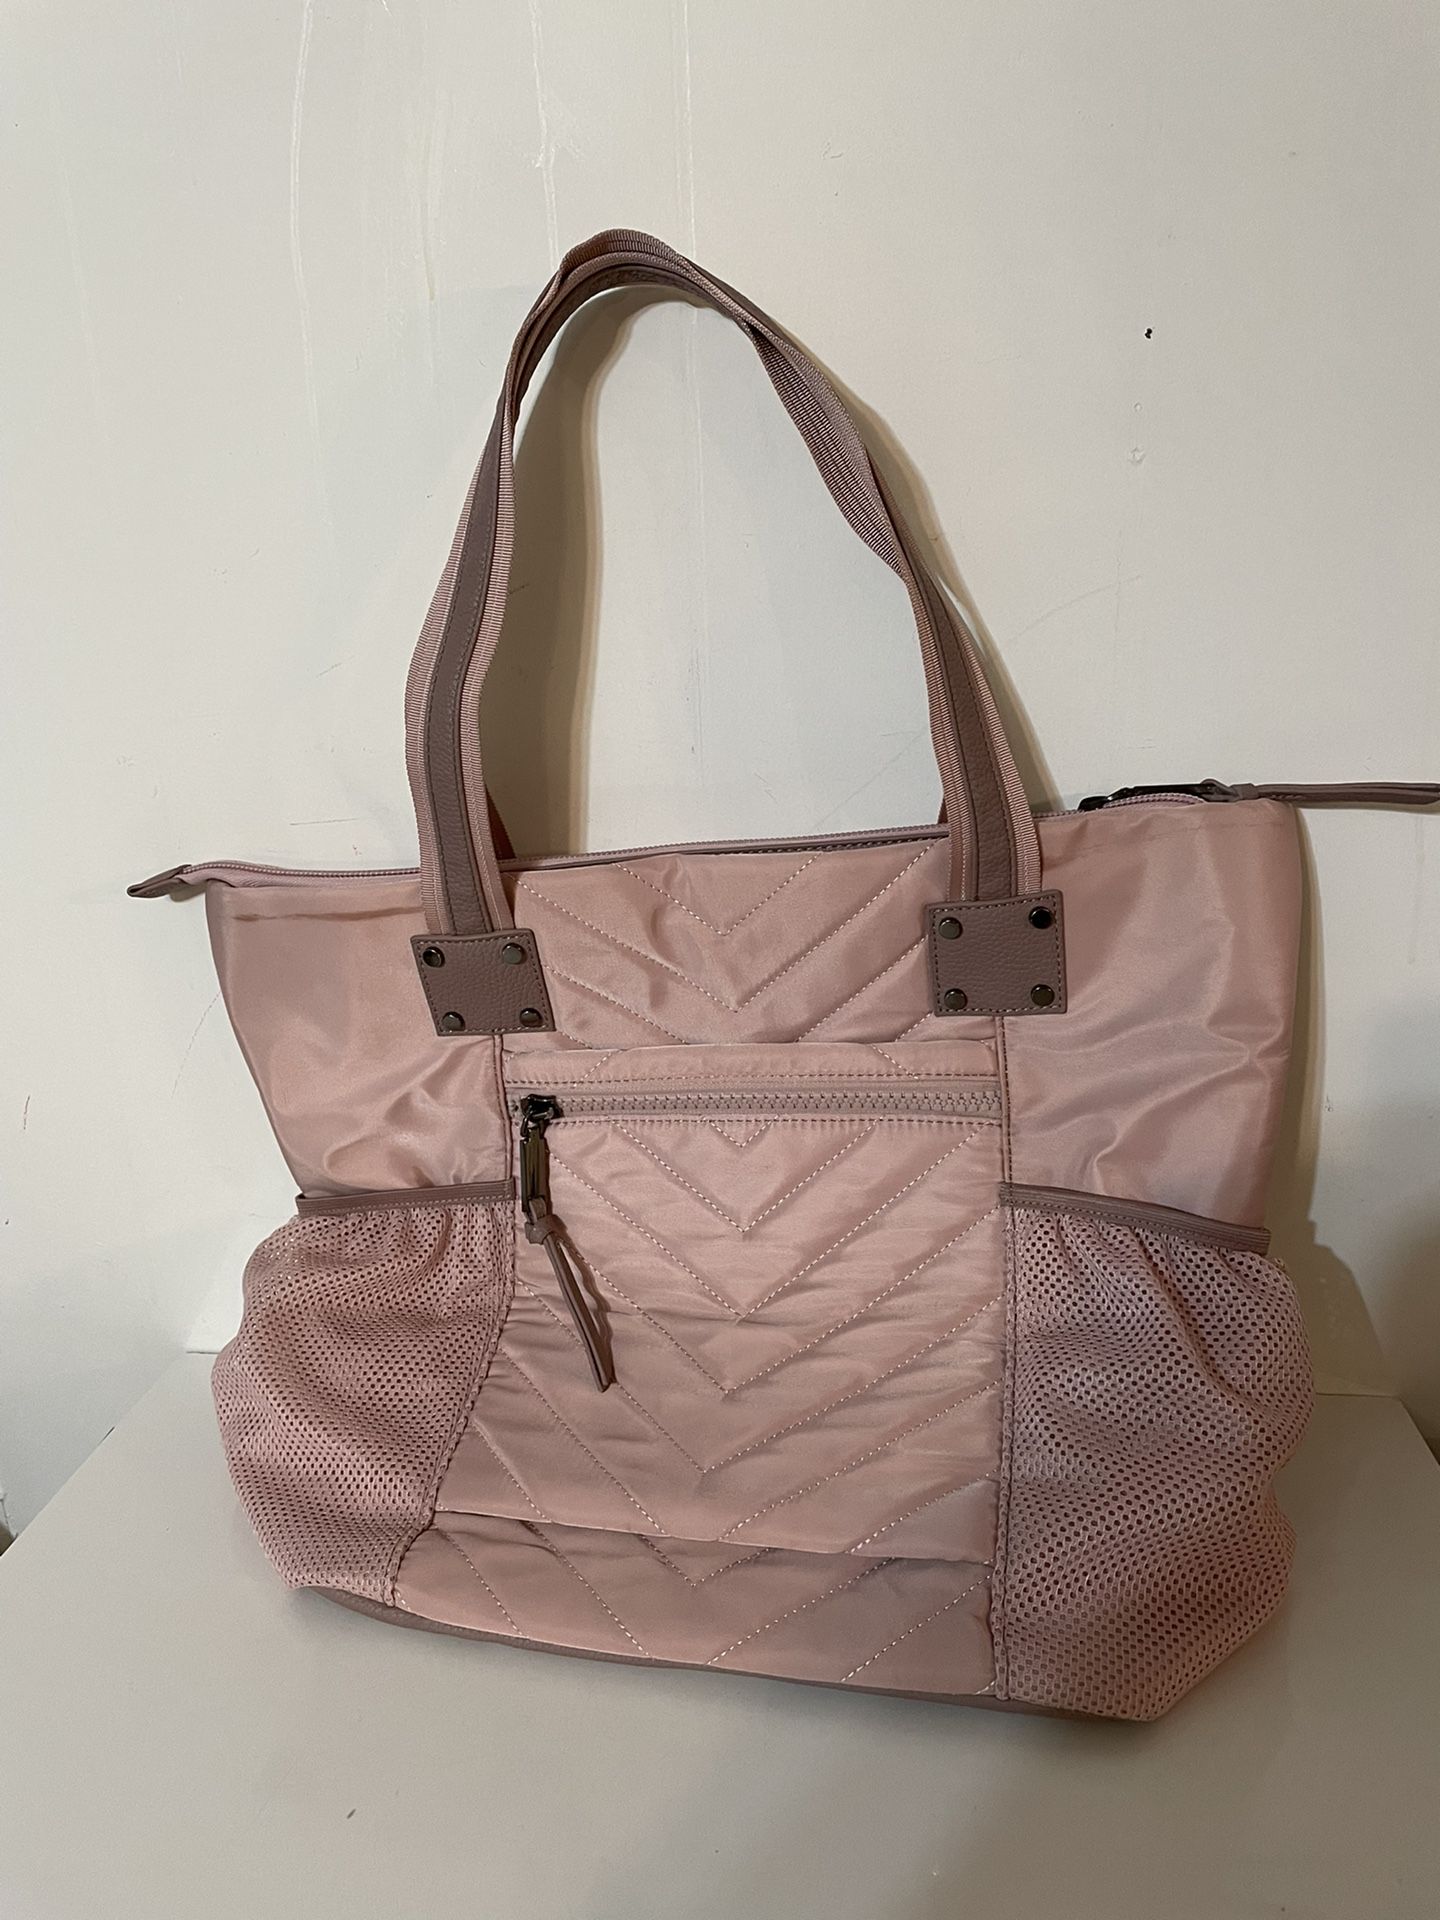 Large And Pretty Blush Colored Bag Like New